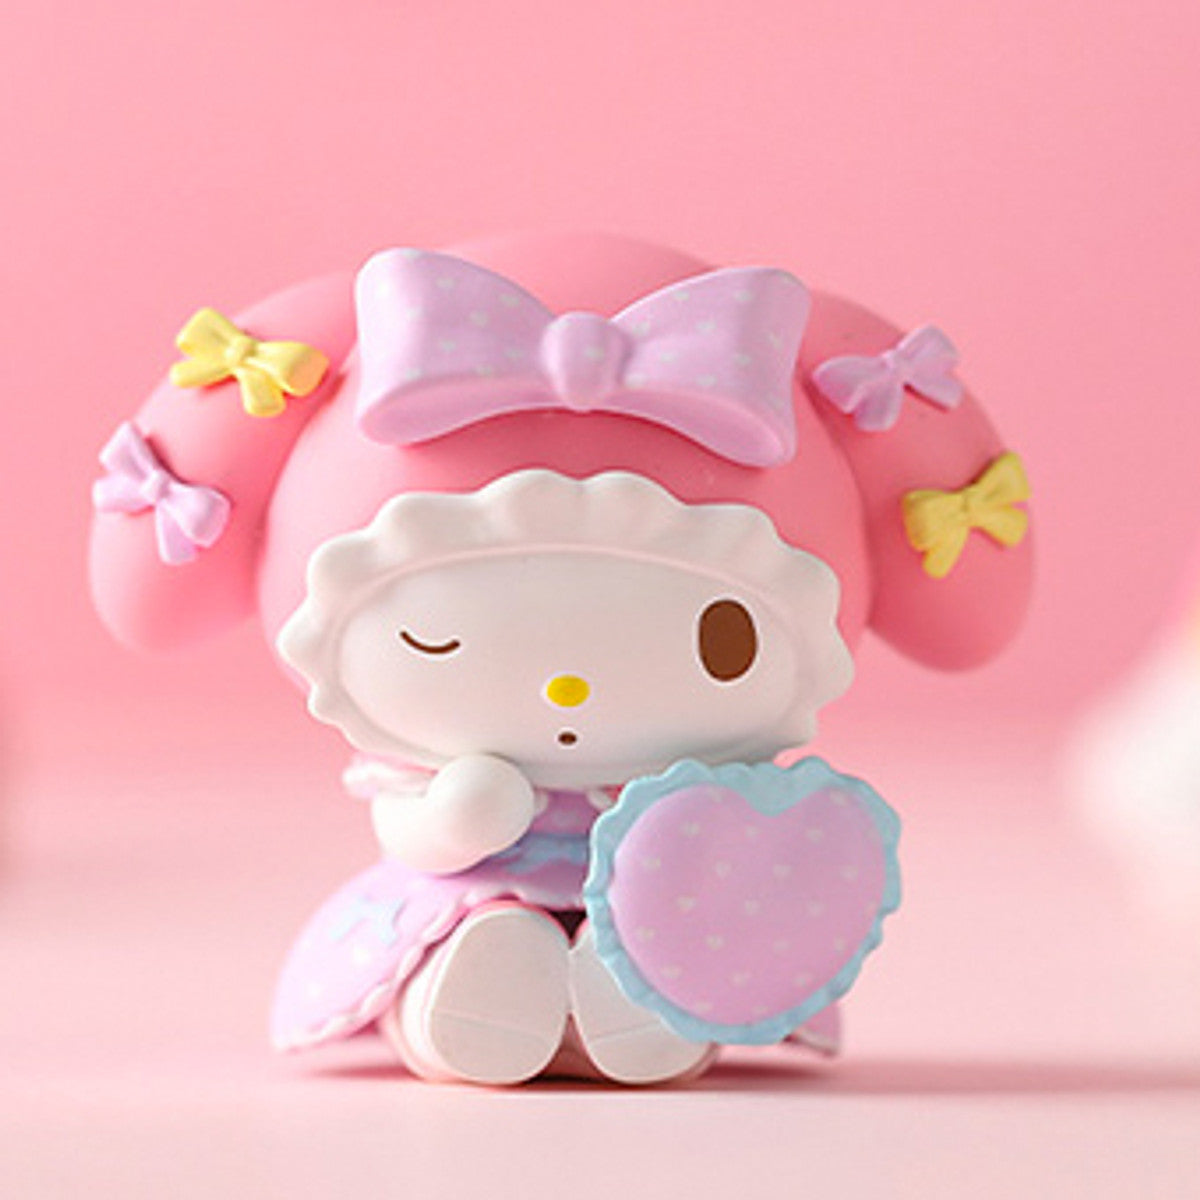 Melody Heart Pillow - Sanrio My Melody Secret Forest Tea Party Series by Sanrio x Miniso